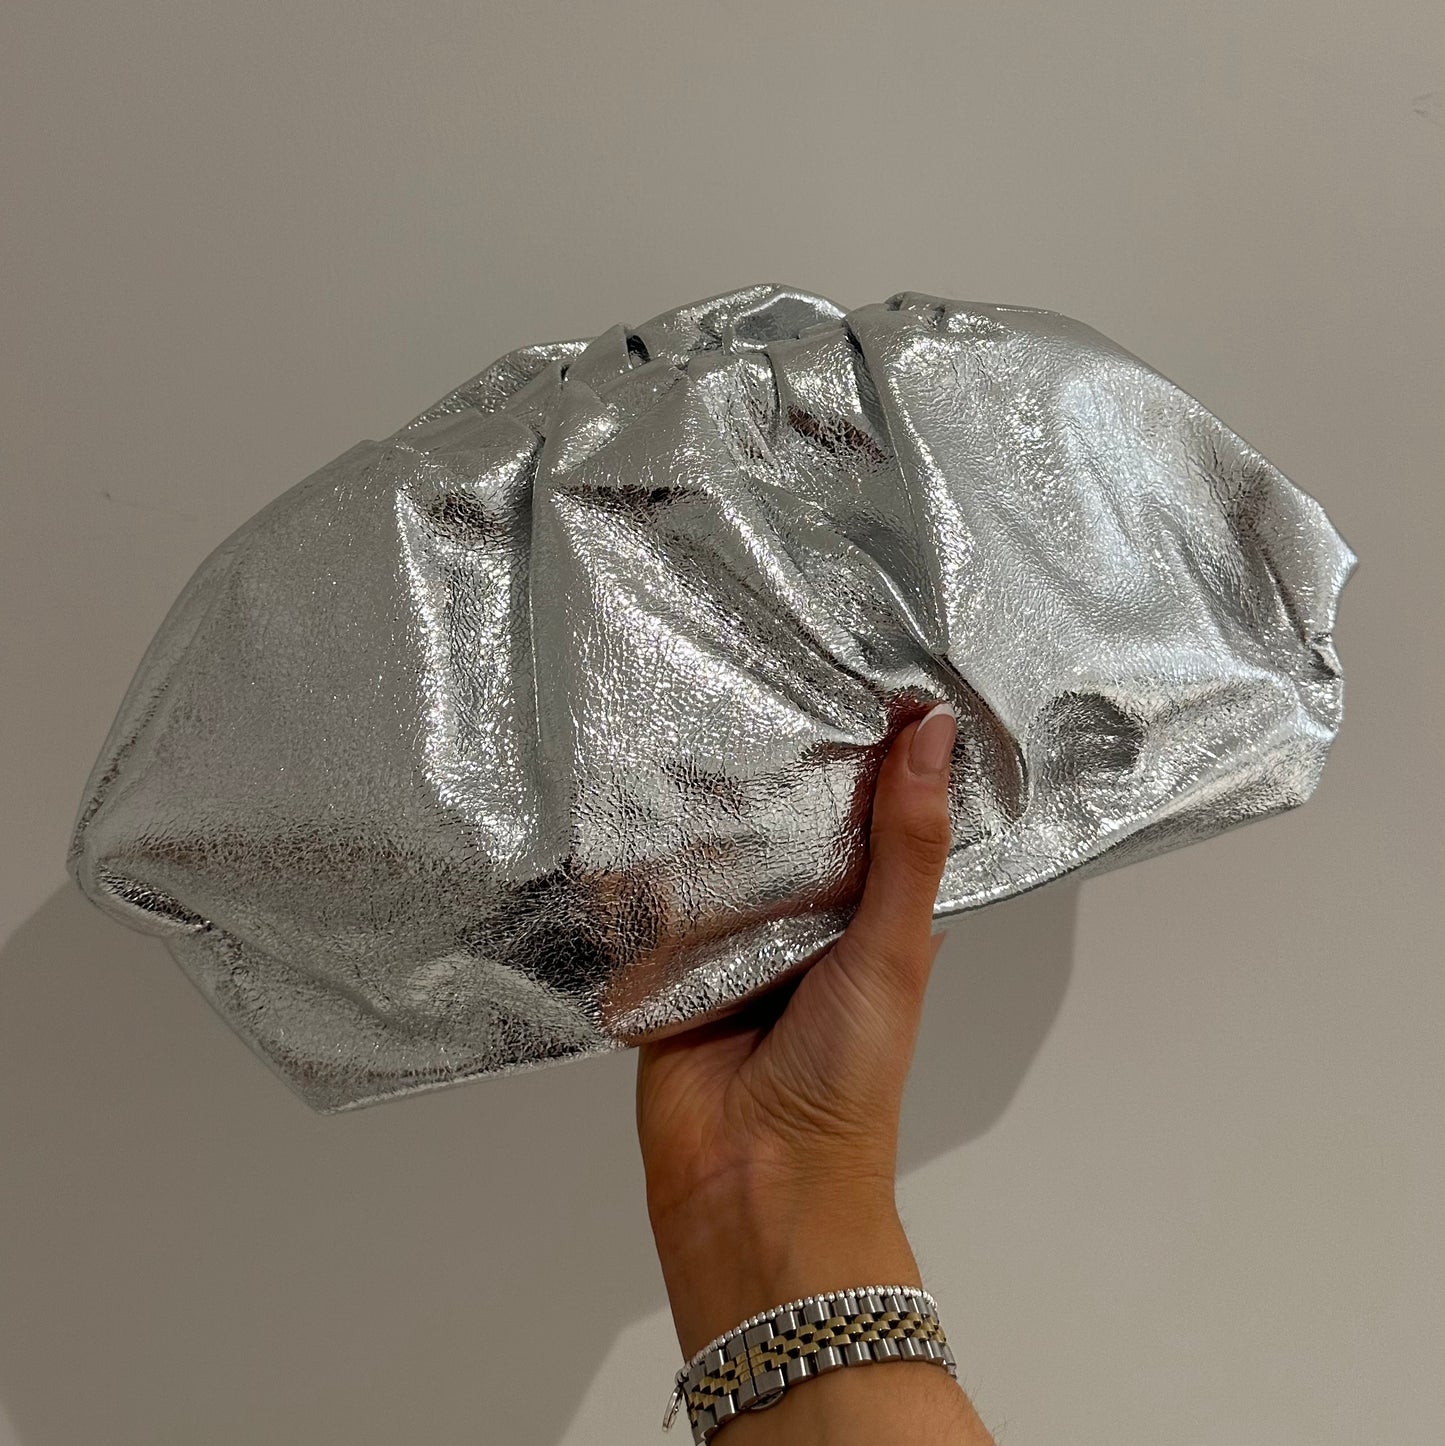 MILACCOLLECTION Silver XL Cloud Style Bag